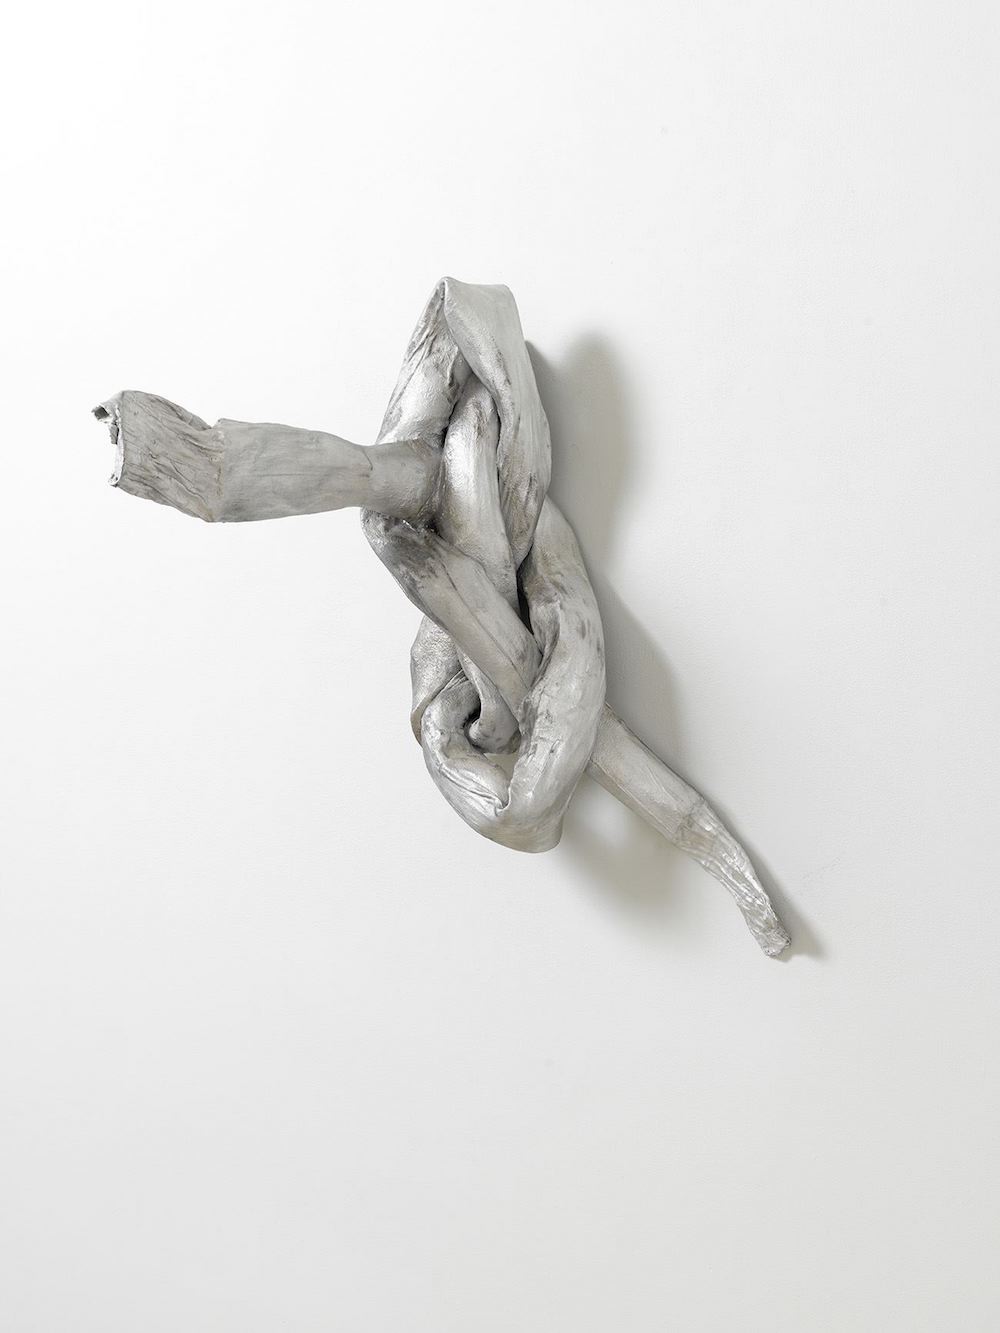 A sculpture of a knotted, tubular form mounted on a wall and mettalic silver in color.